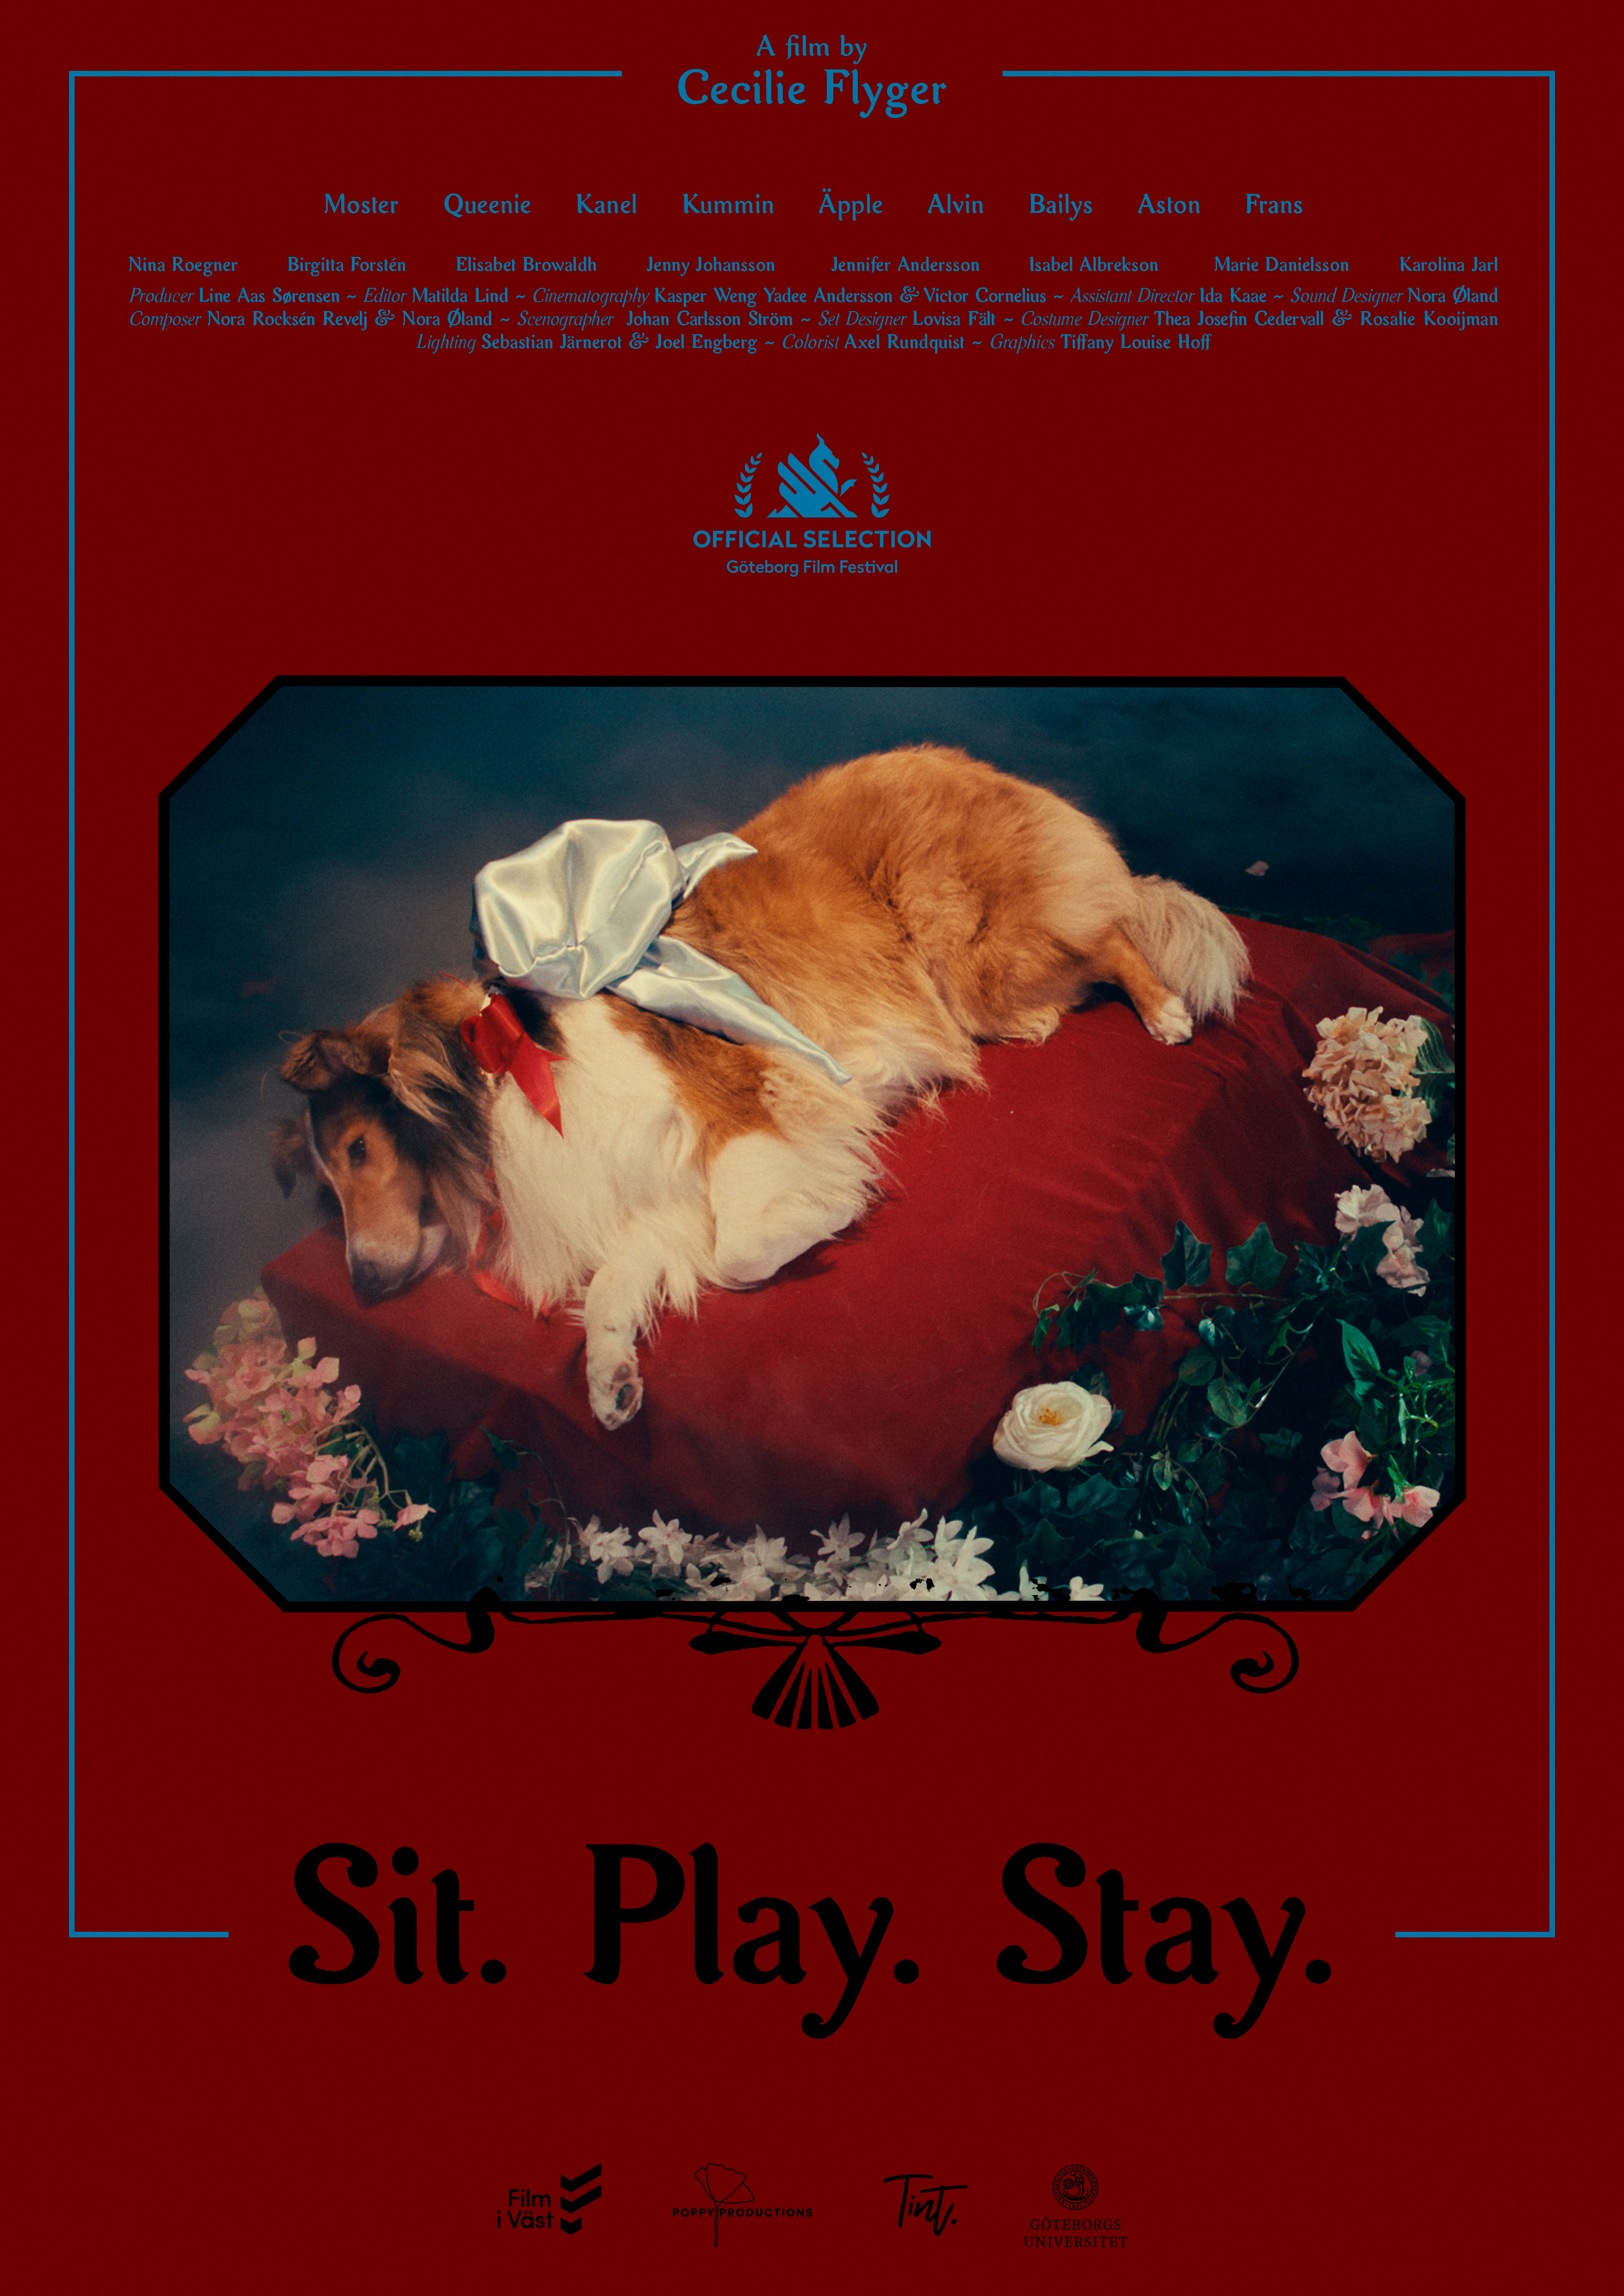 Sit. Play. Stay.